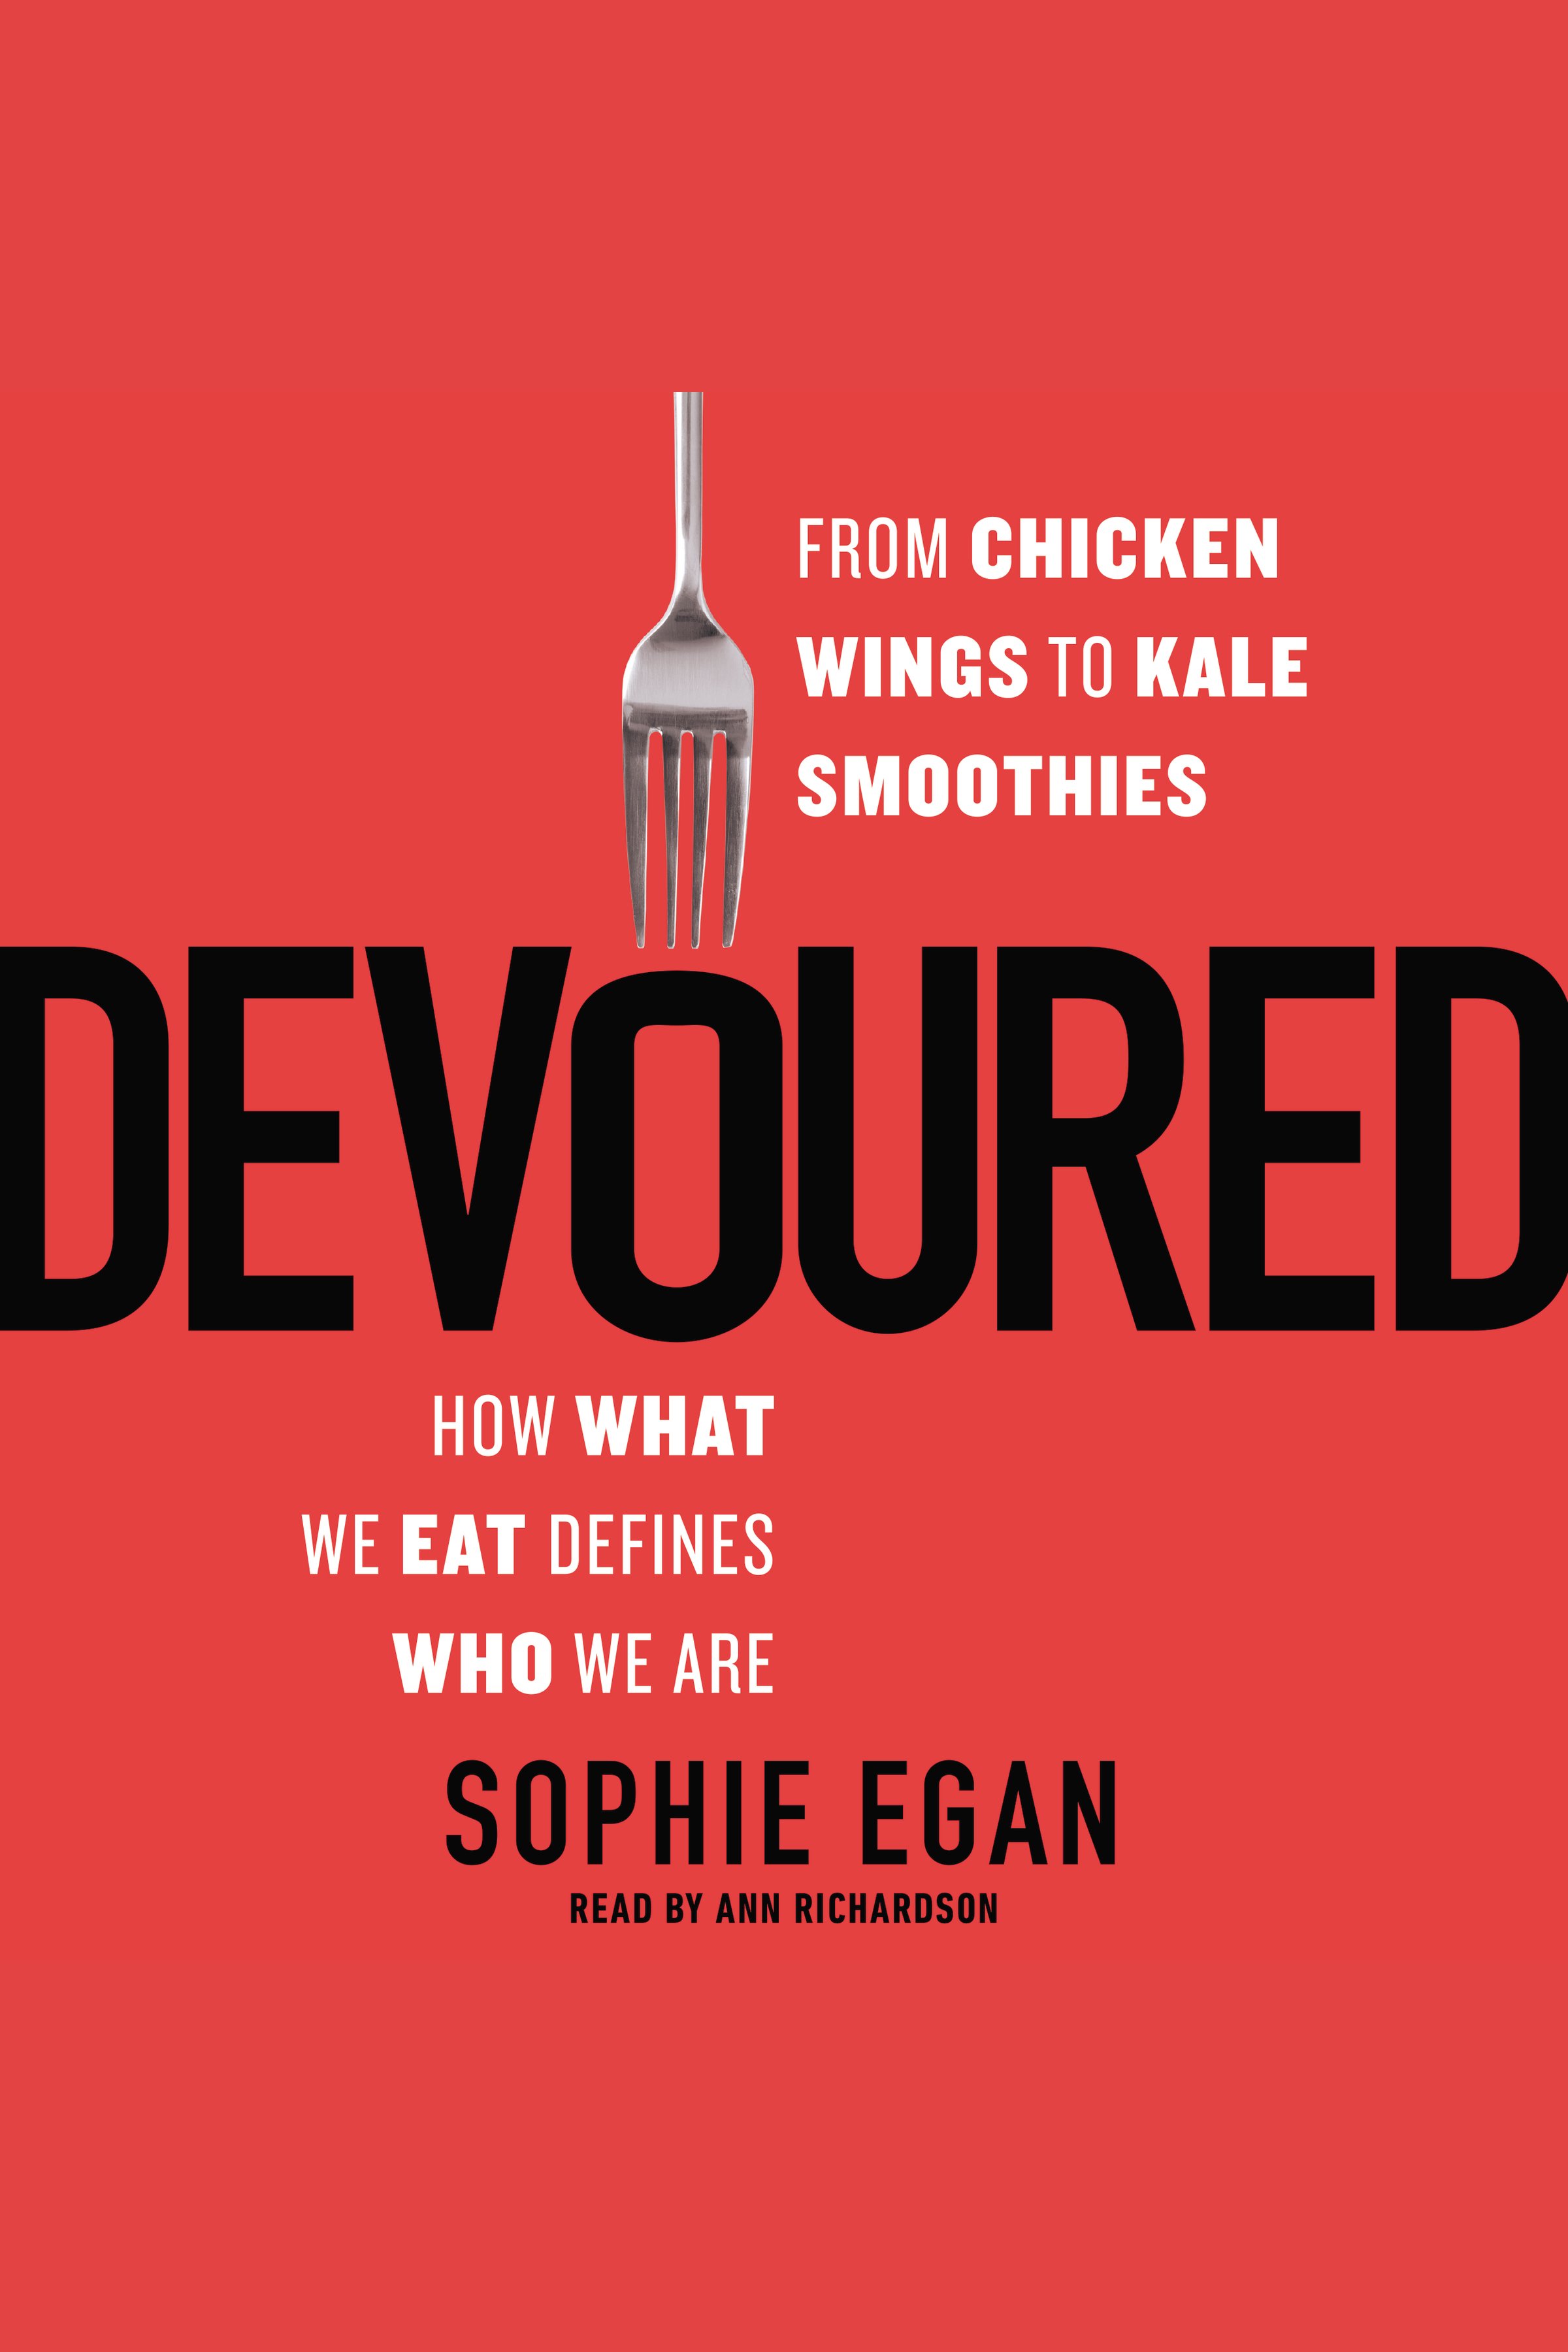 Image de couverture de Devoured [electronic resource] : From Chicken Wings to Kale Smoothies - How What We Eat Defines Who We Are